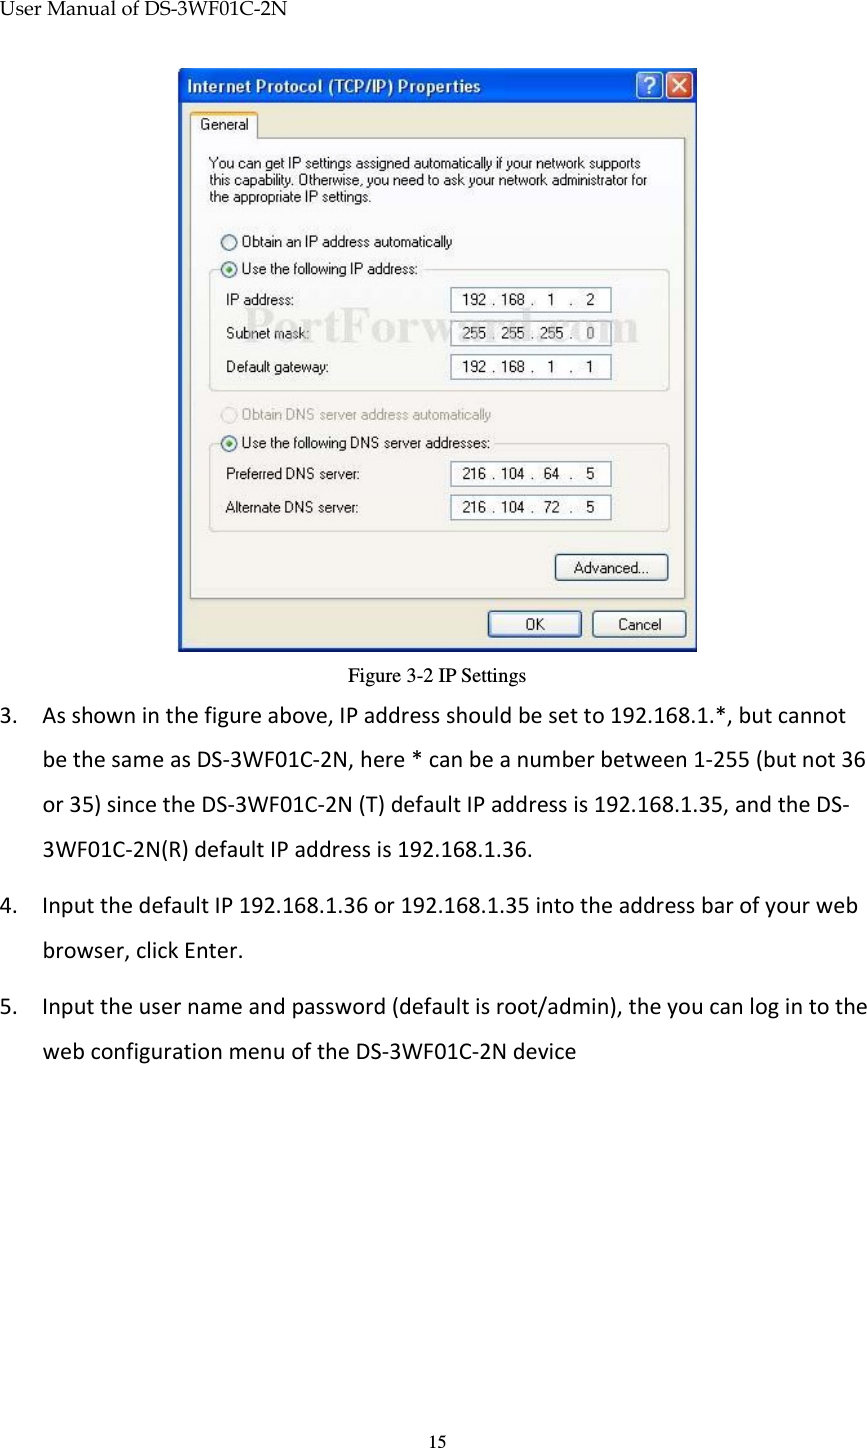 User Manual of DS-3WF01C-2N   15 Figure 3-2 IP Settings 3. As shown in the figure above, IP address should be set to 192.168.1.*, but cannot be the same as DS-3WF01C-2N, here * can be a number between 1-255 (but not 36 or 35) since the DS-3WF01C-2N (T) default IP address is 192.168.1.35, and the DS-3WF01C-2N(R) default IP address is 192.168.1.36. 4. Input the default IP 192.168.1.36 or 192.168.1.35 into the address bar of your web browser, click Enter. 5. Input the user name and password (default is root/admin), the you can log in to the web configuration menu of the DS-3WF01C-2N device 